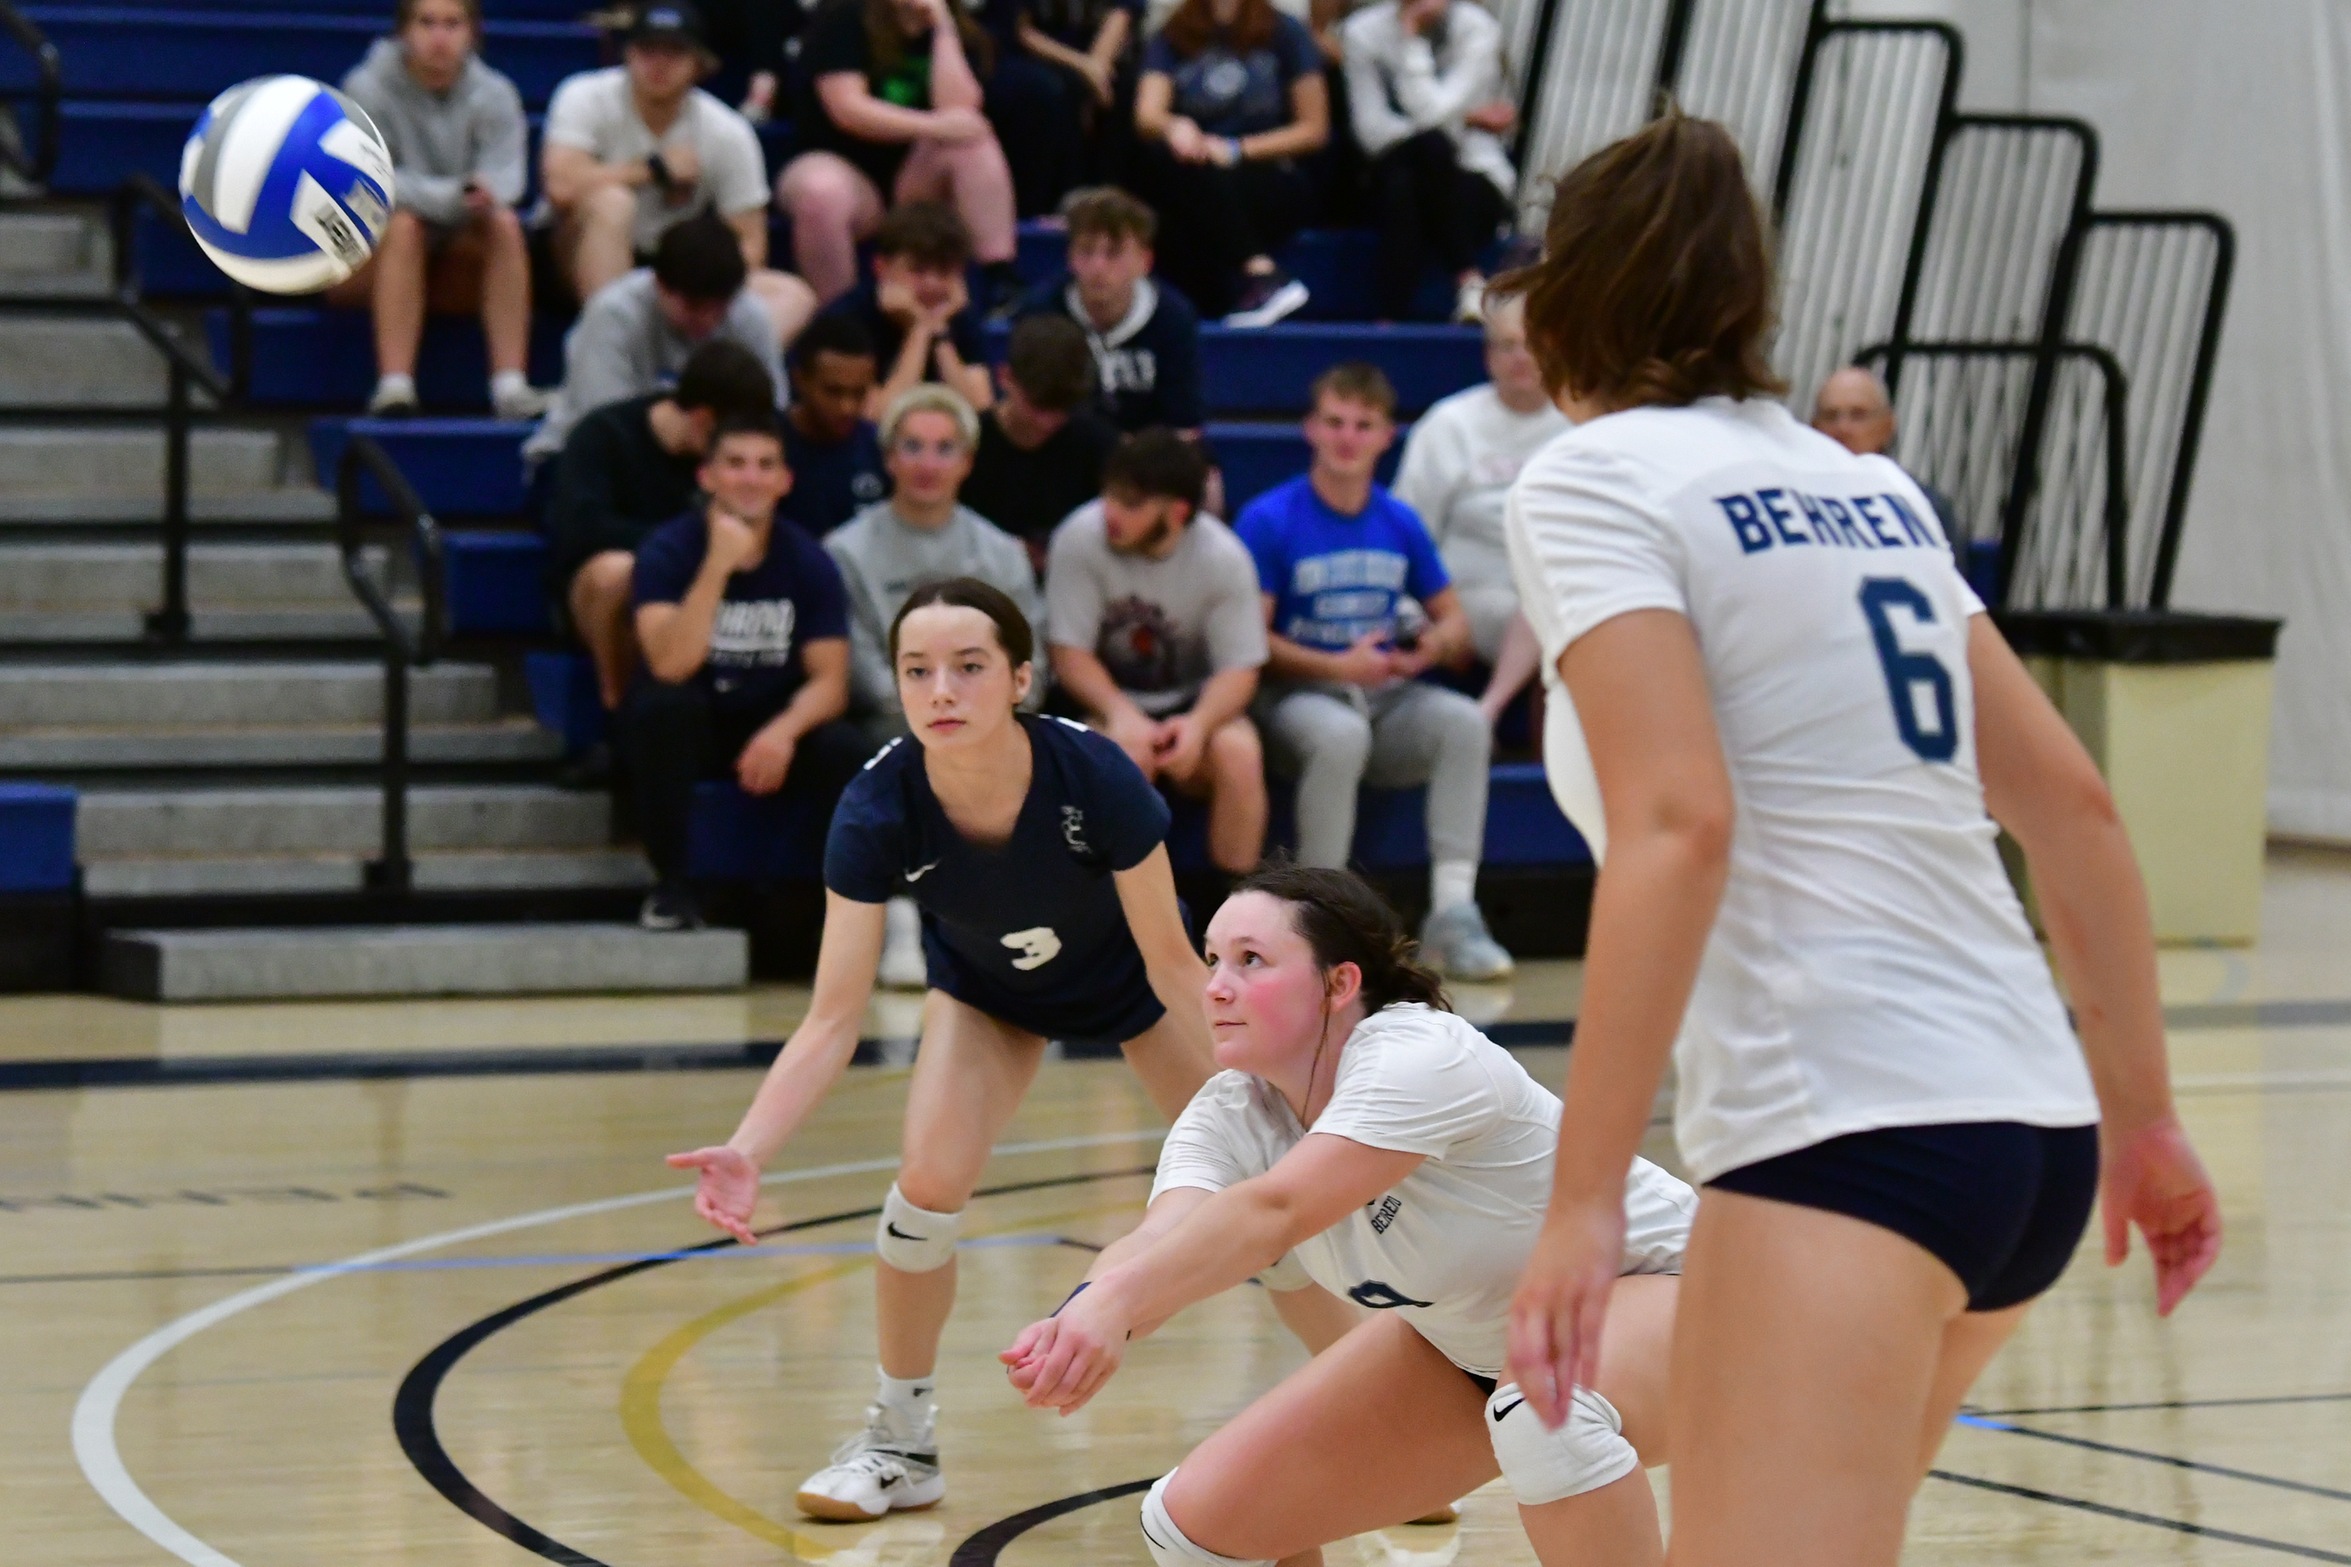 Buffalo State Takes Behrend Lions Women's Volleyball in Five